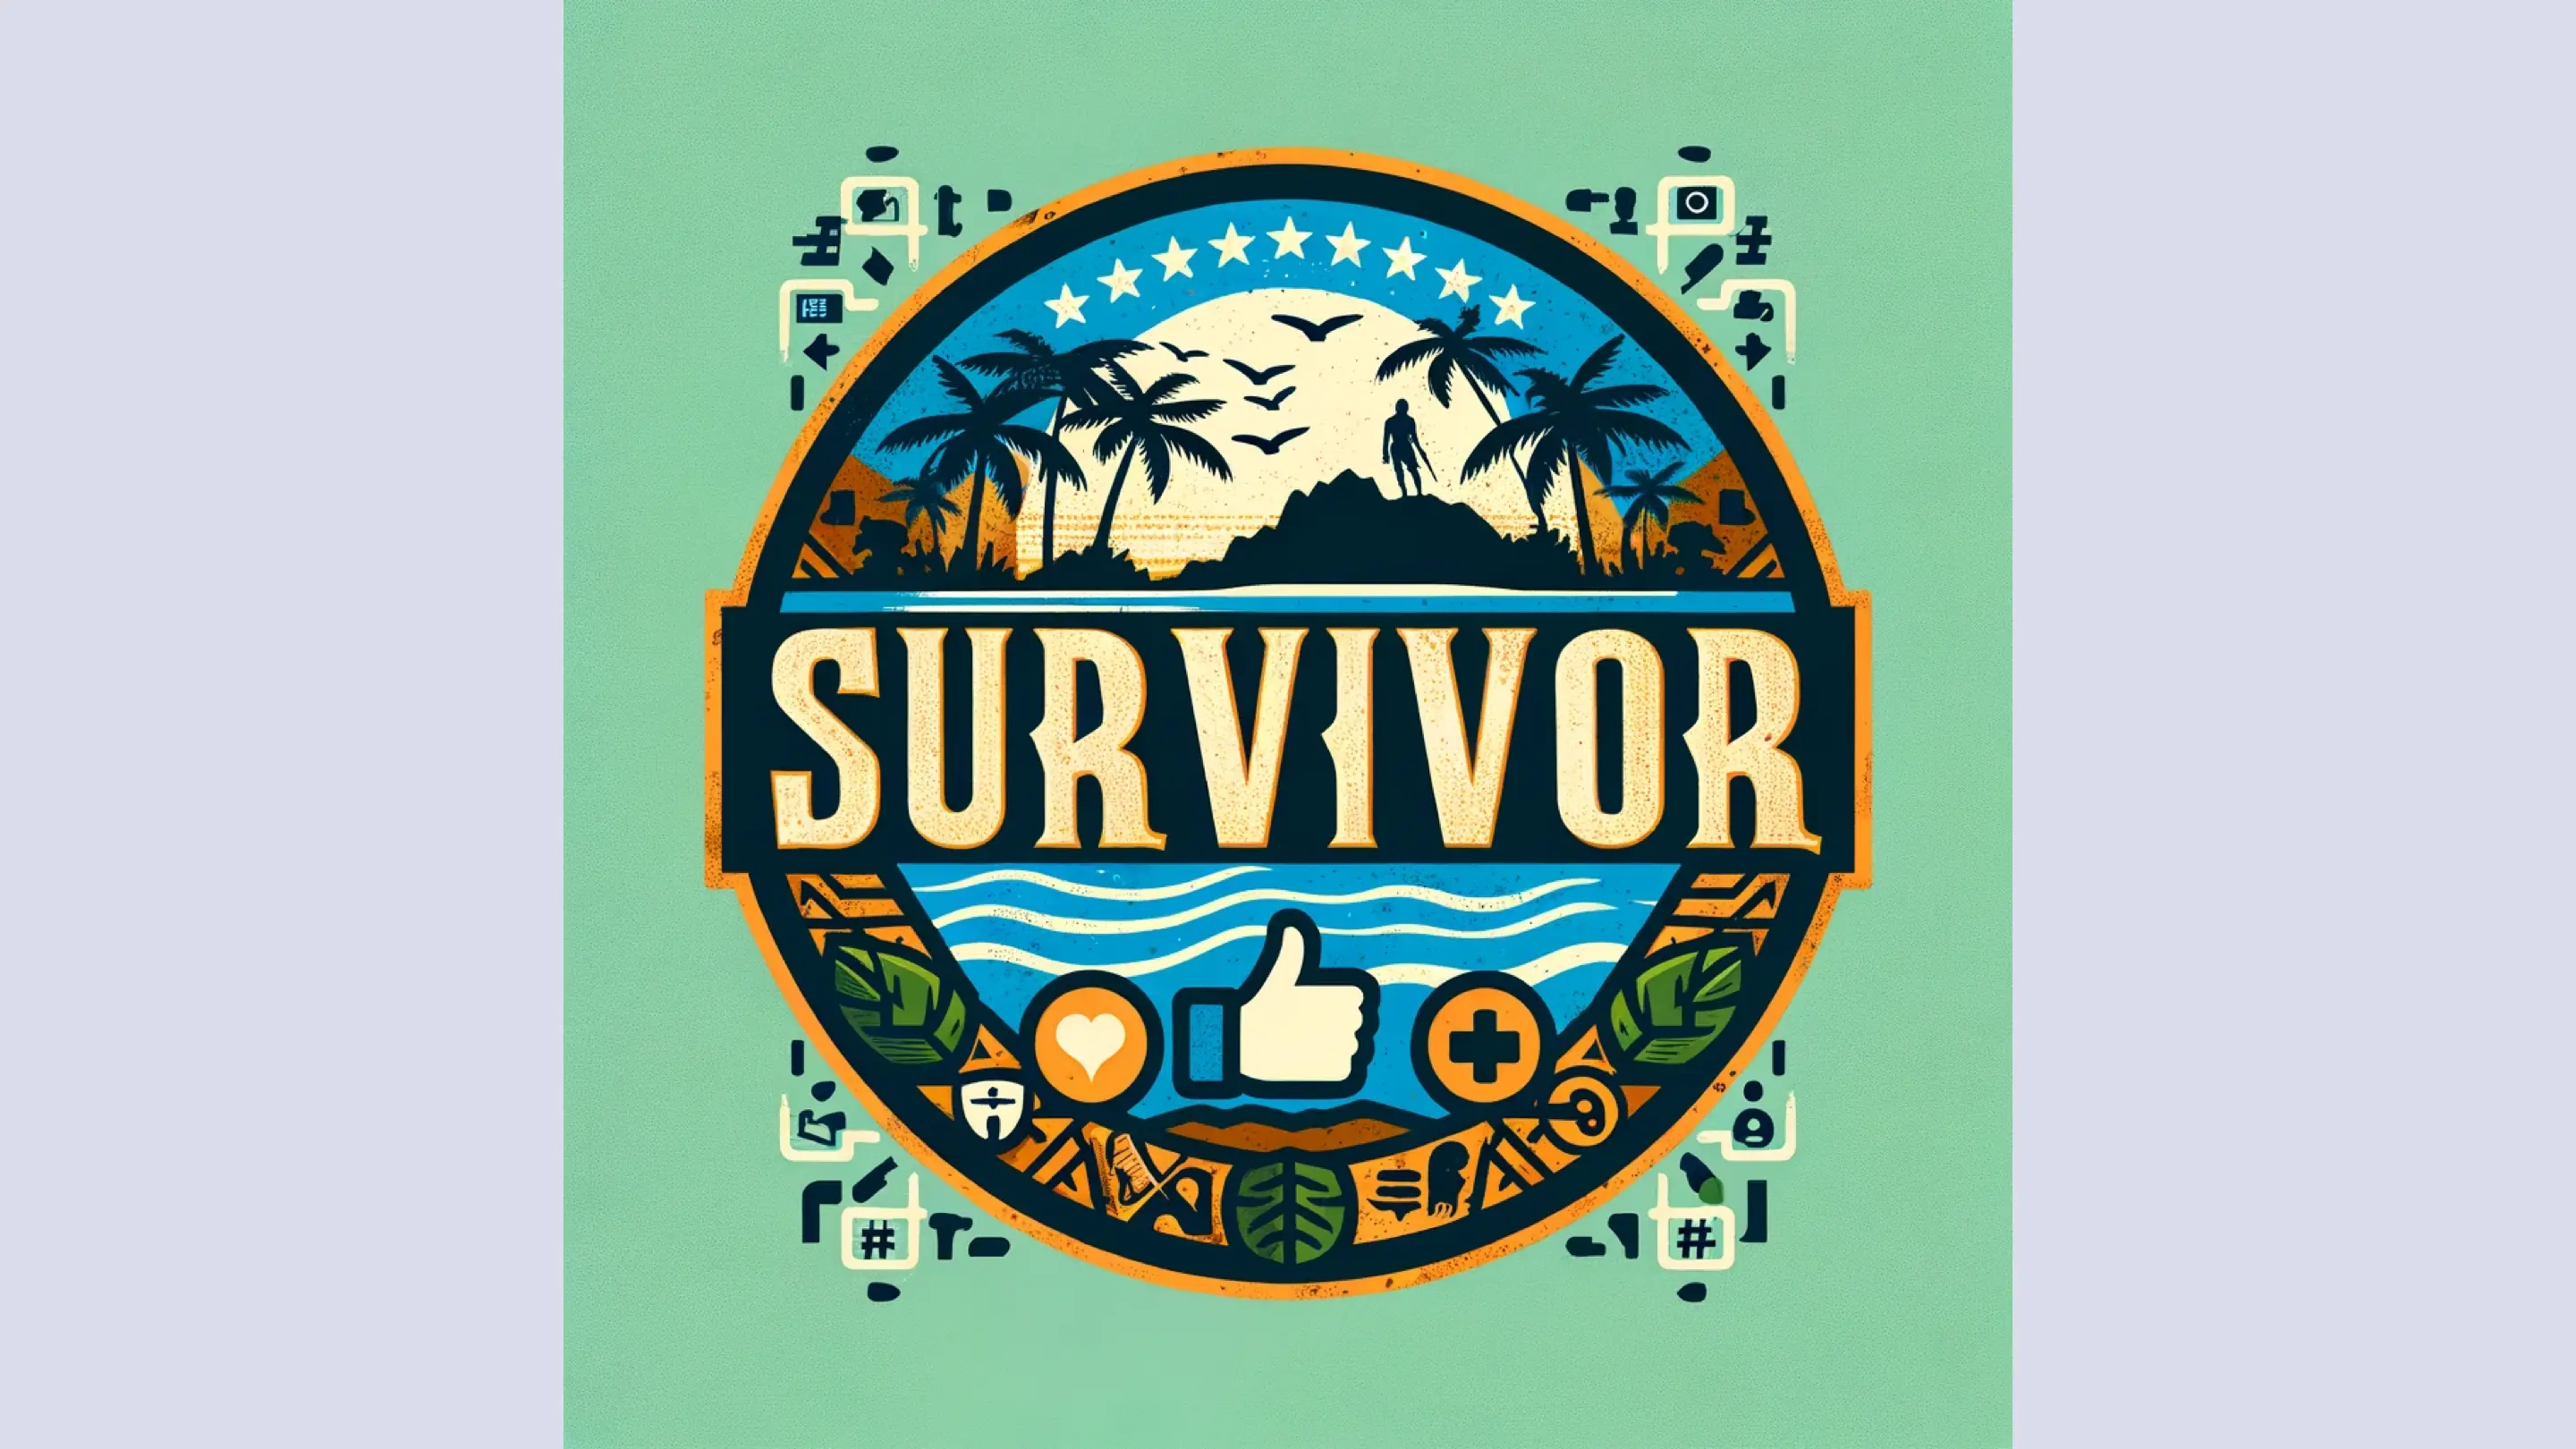 Parody of Survivor tv show logo with Like thumb, heart icon, and plus icon buttons.